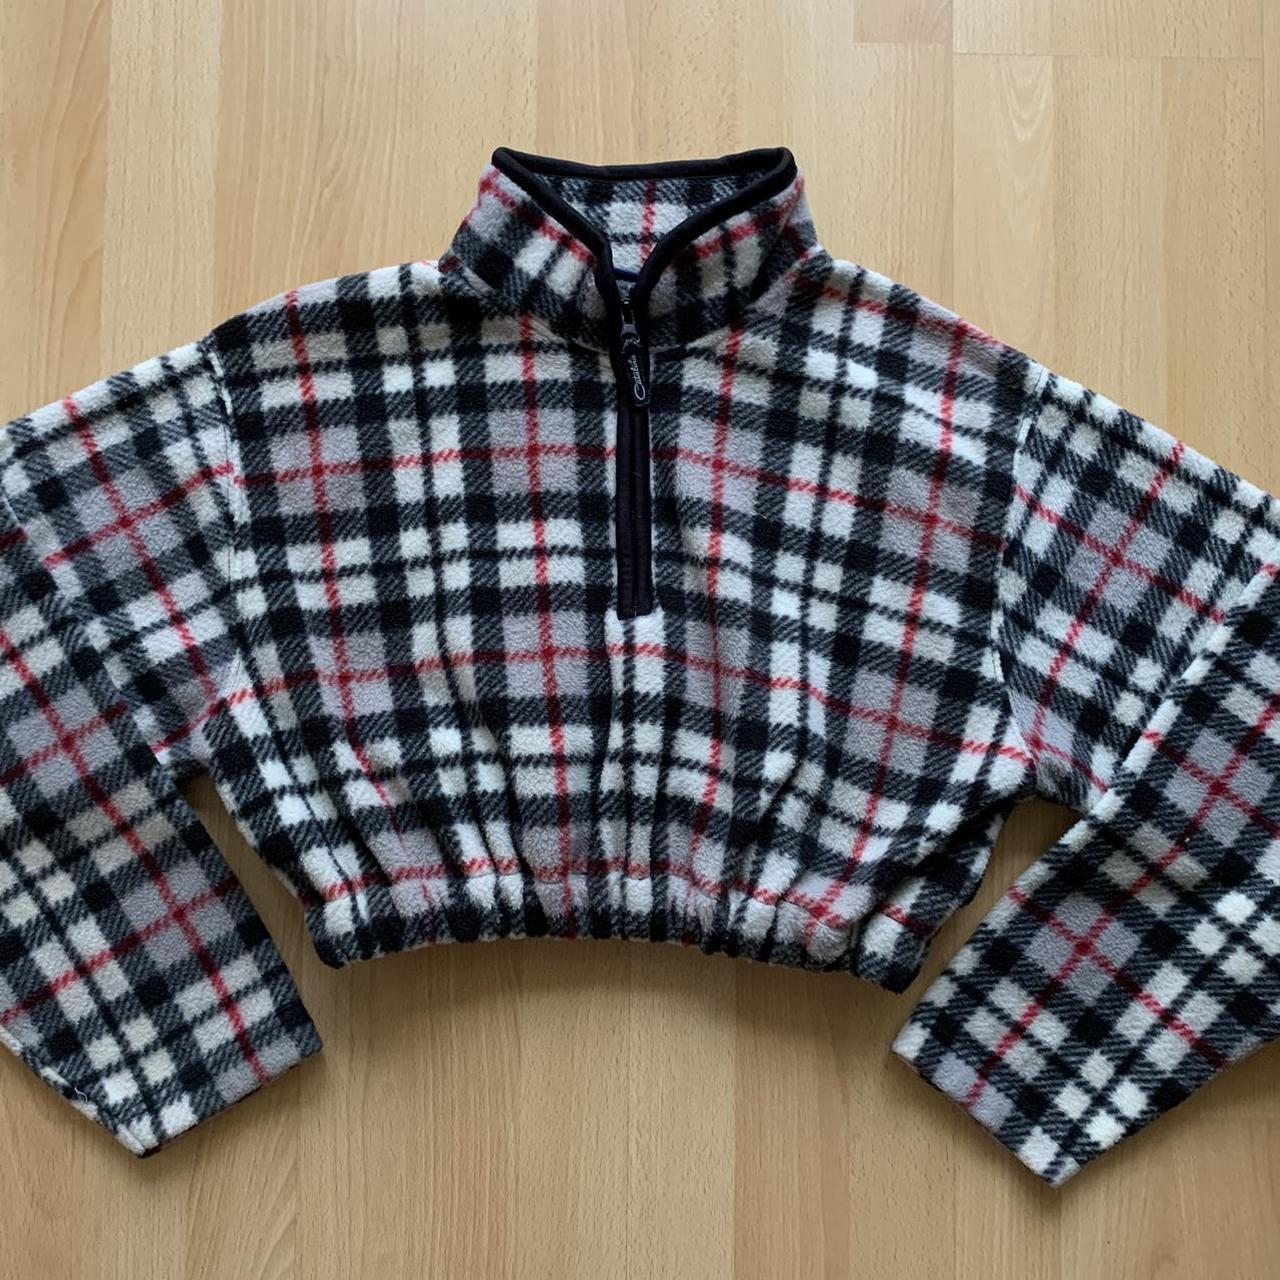 Product Image 2 - Adorable plaid fleece reworked crop